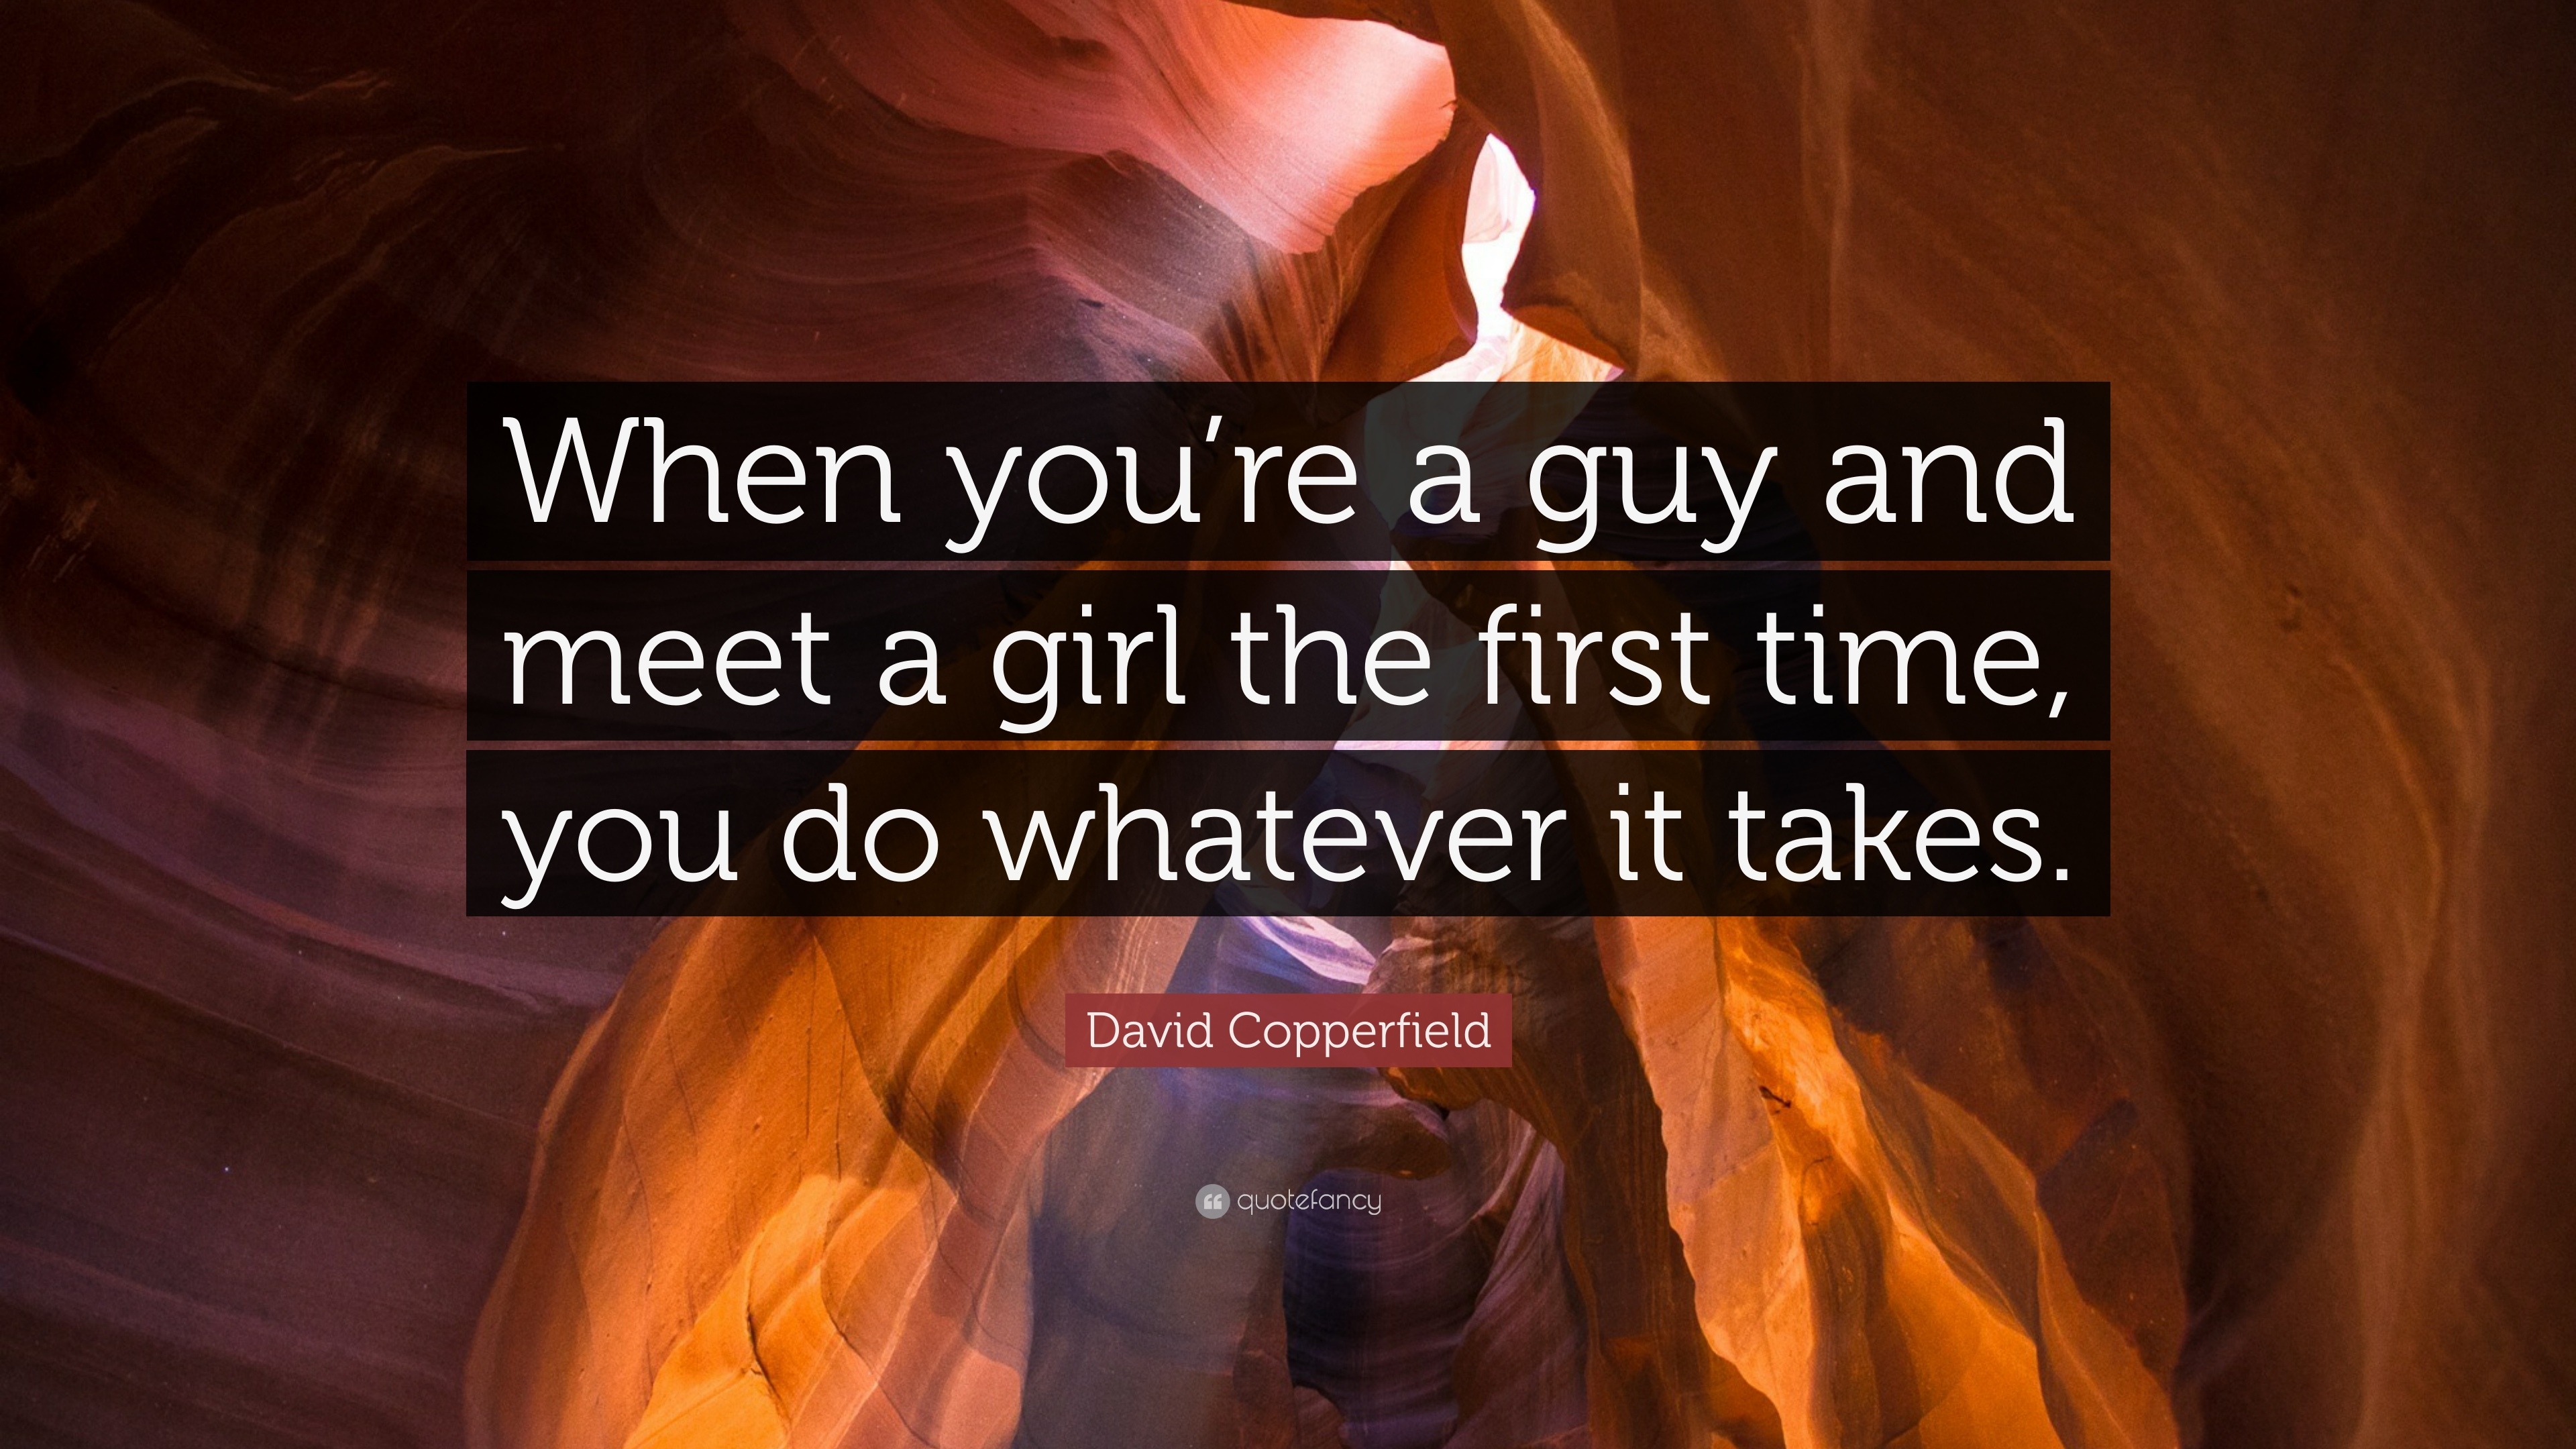 David Copperfield Quote: “When you're a guy and meet a girl the first time,  you